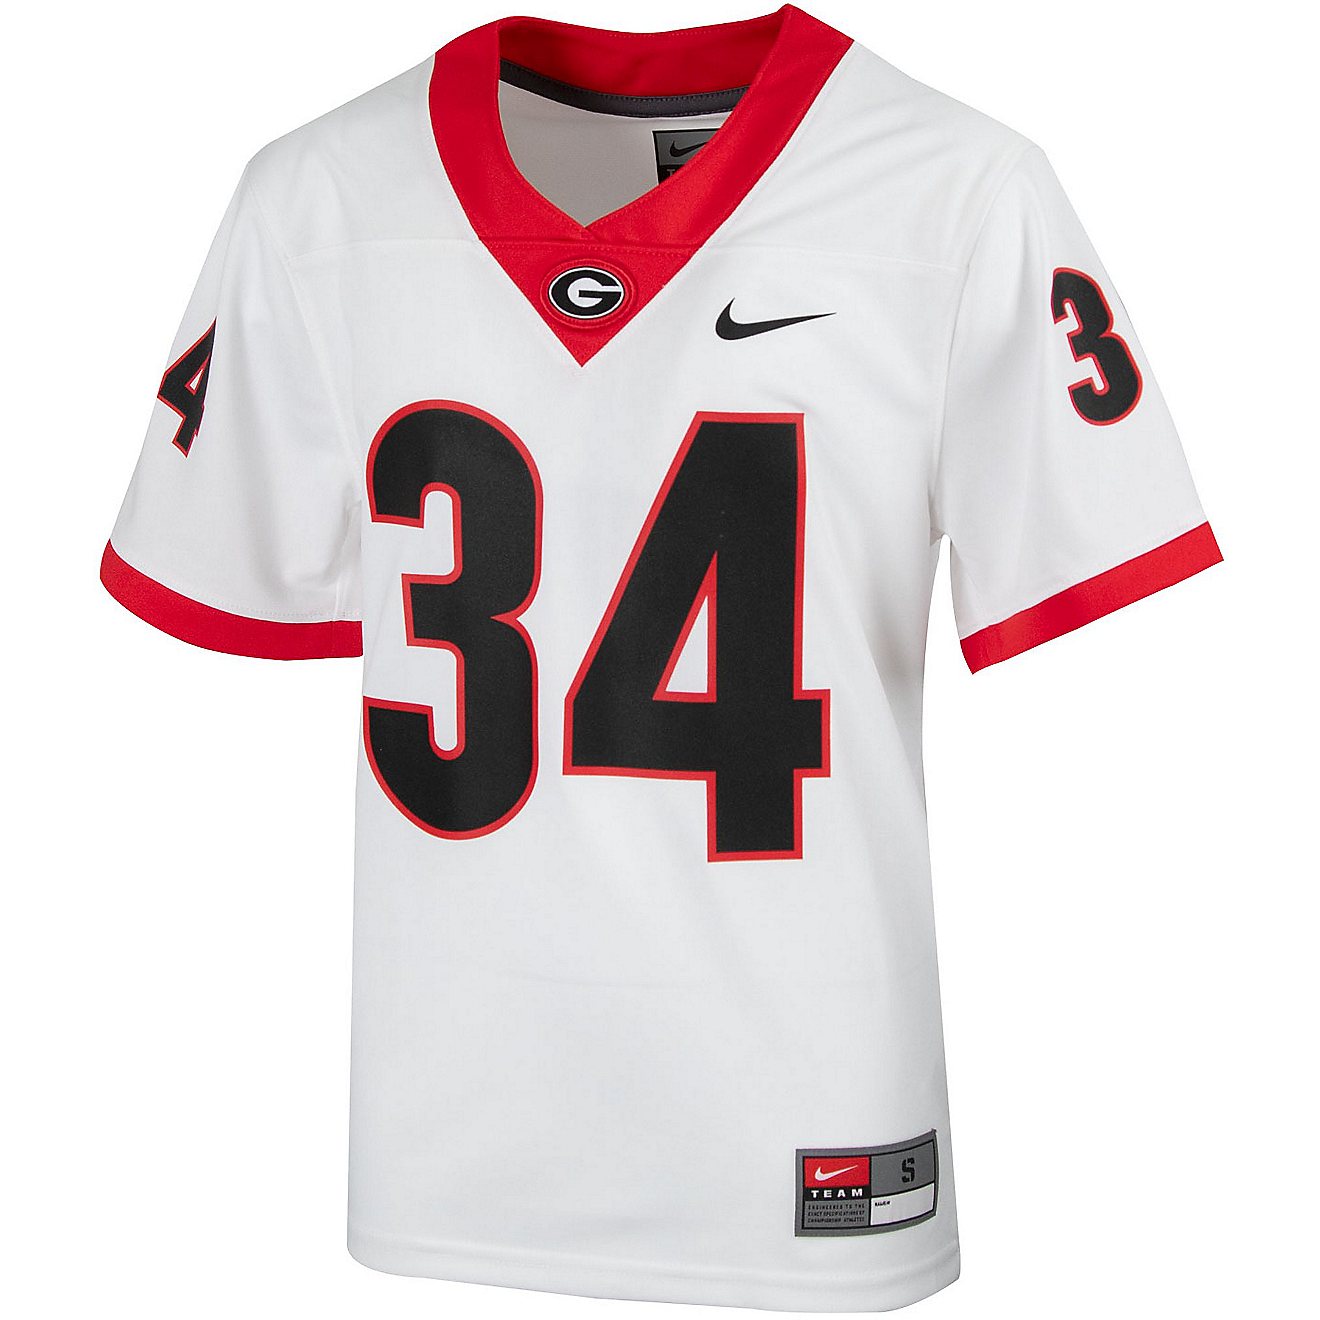 Nike Boys' University of Georgia Young Athletes Replica Football Jersey                                                          - view number 1